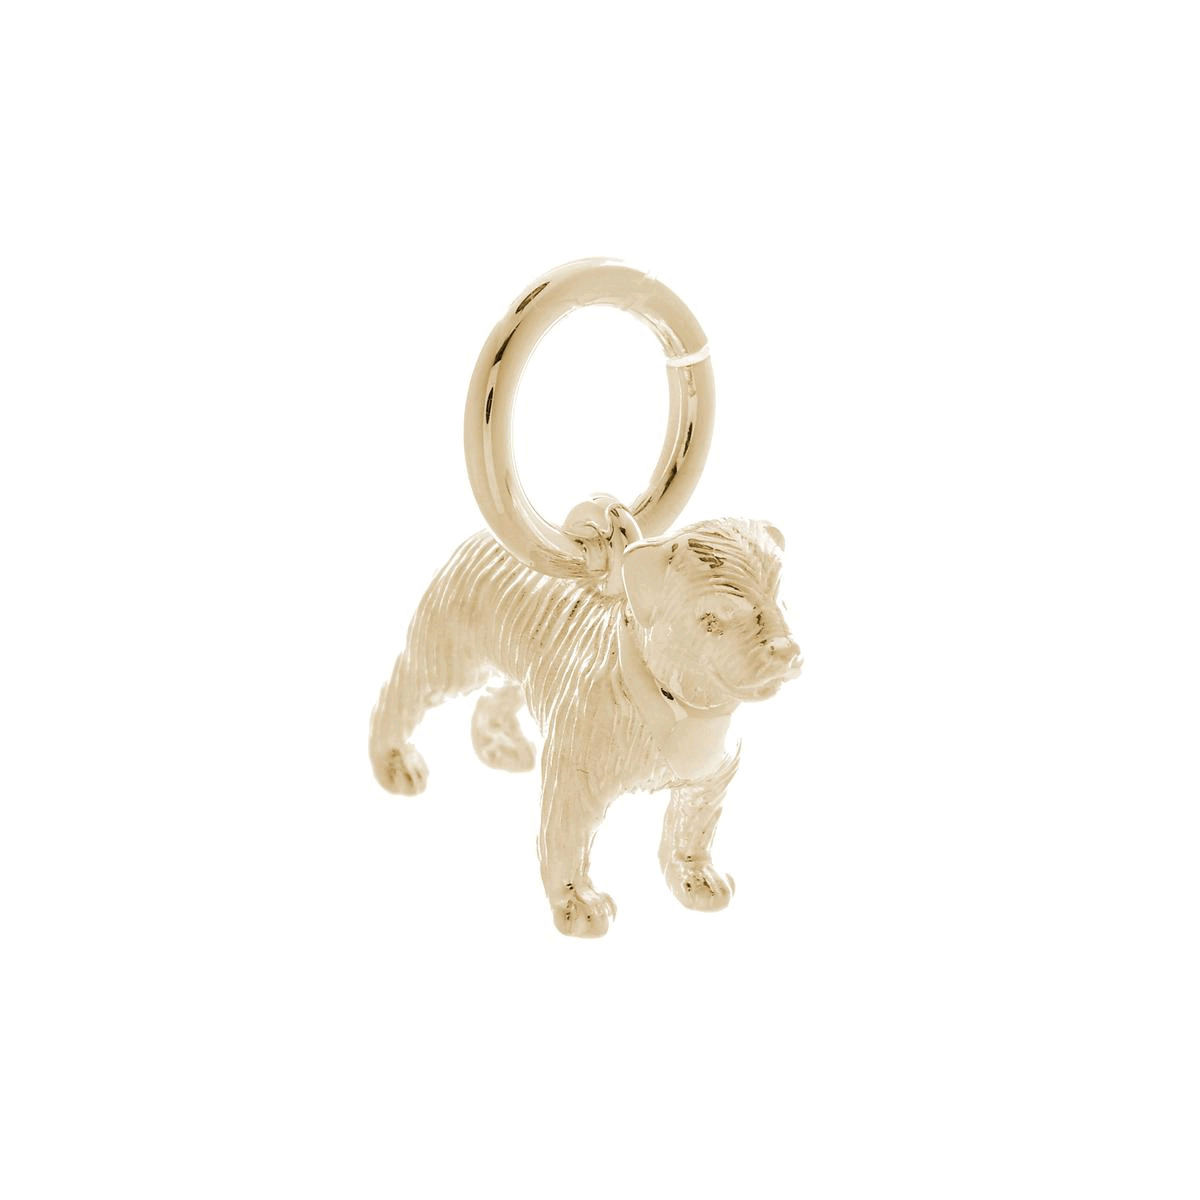 solid gold border terrier charm scarlett jewellery Brighton UK unique jewellery gifts for dog owners as seen at Chelsea Flower Show